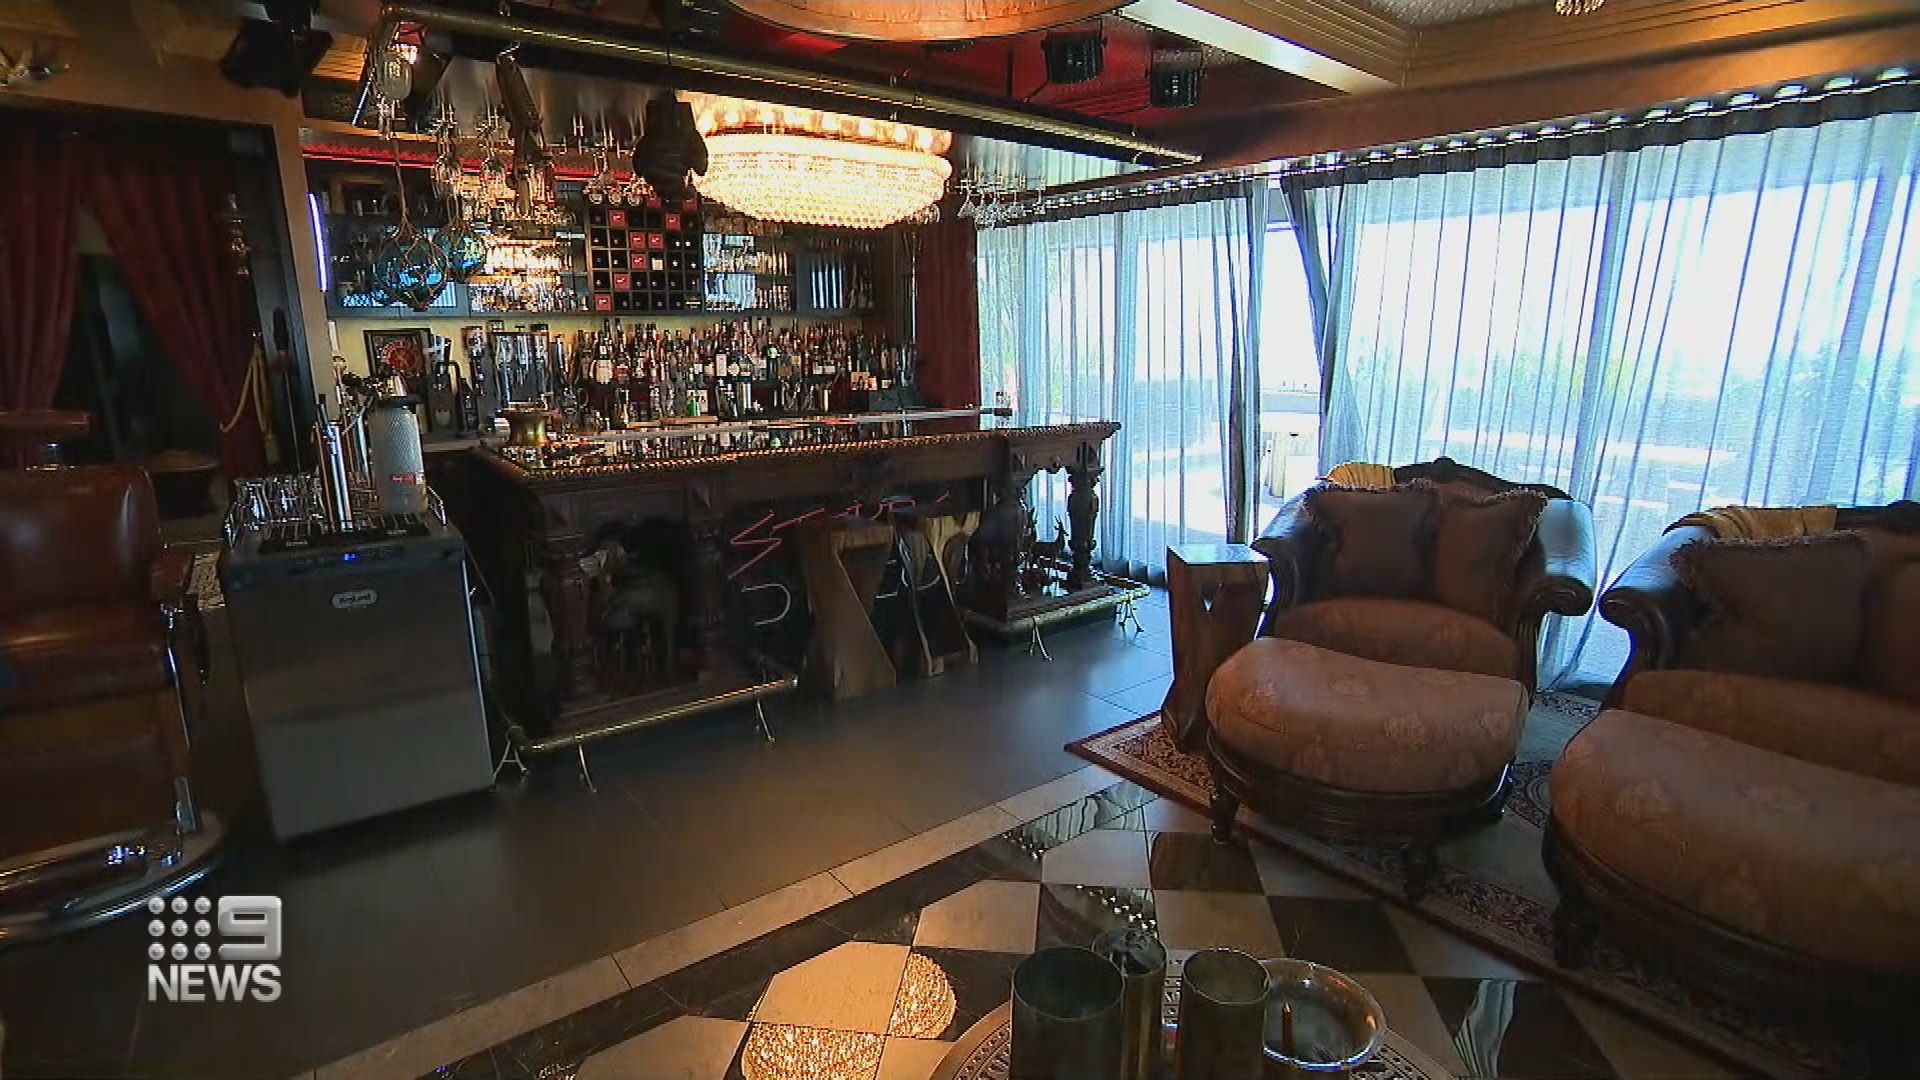 The fully stocked bar in the penthouse.